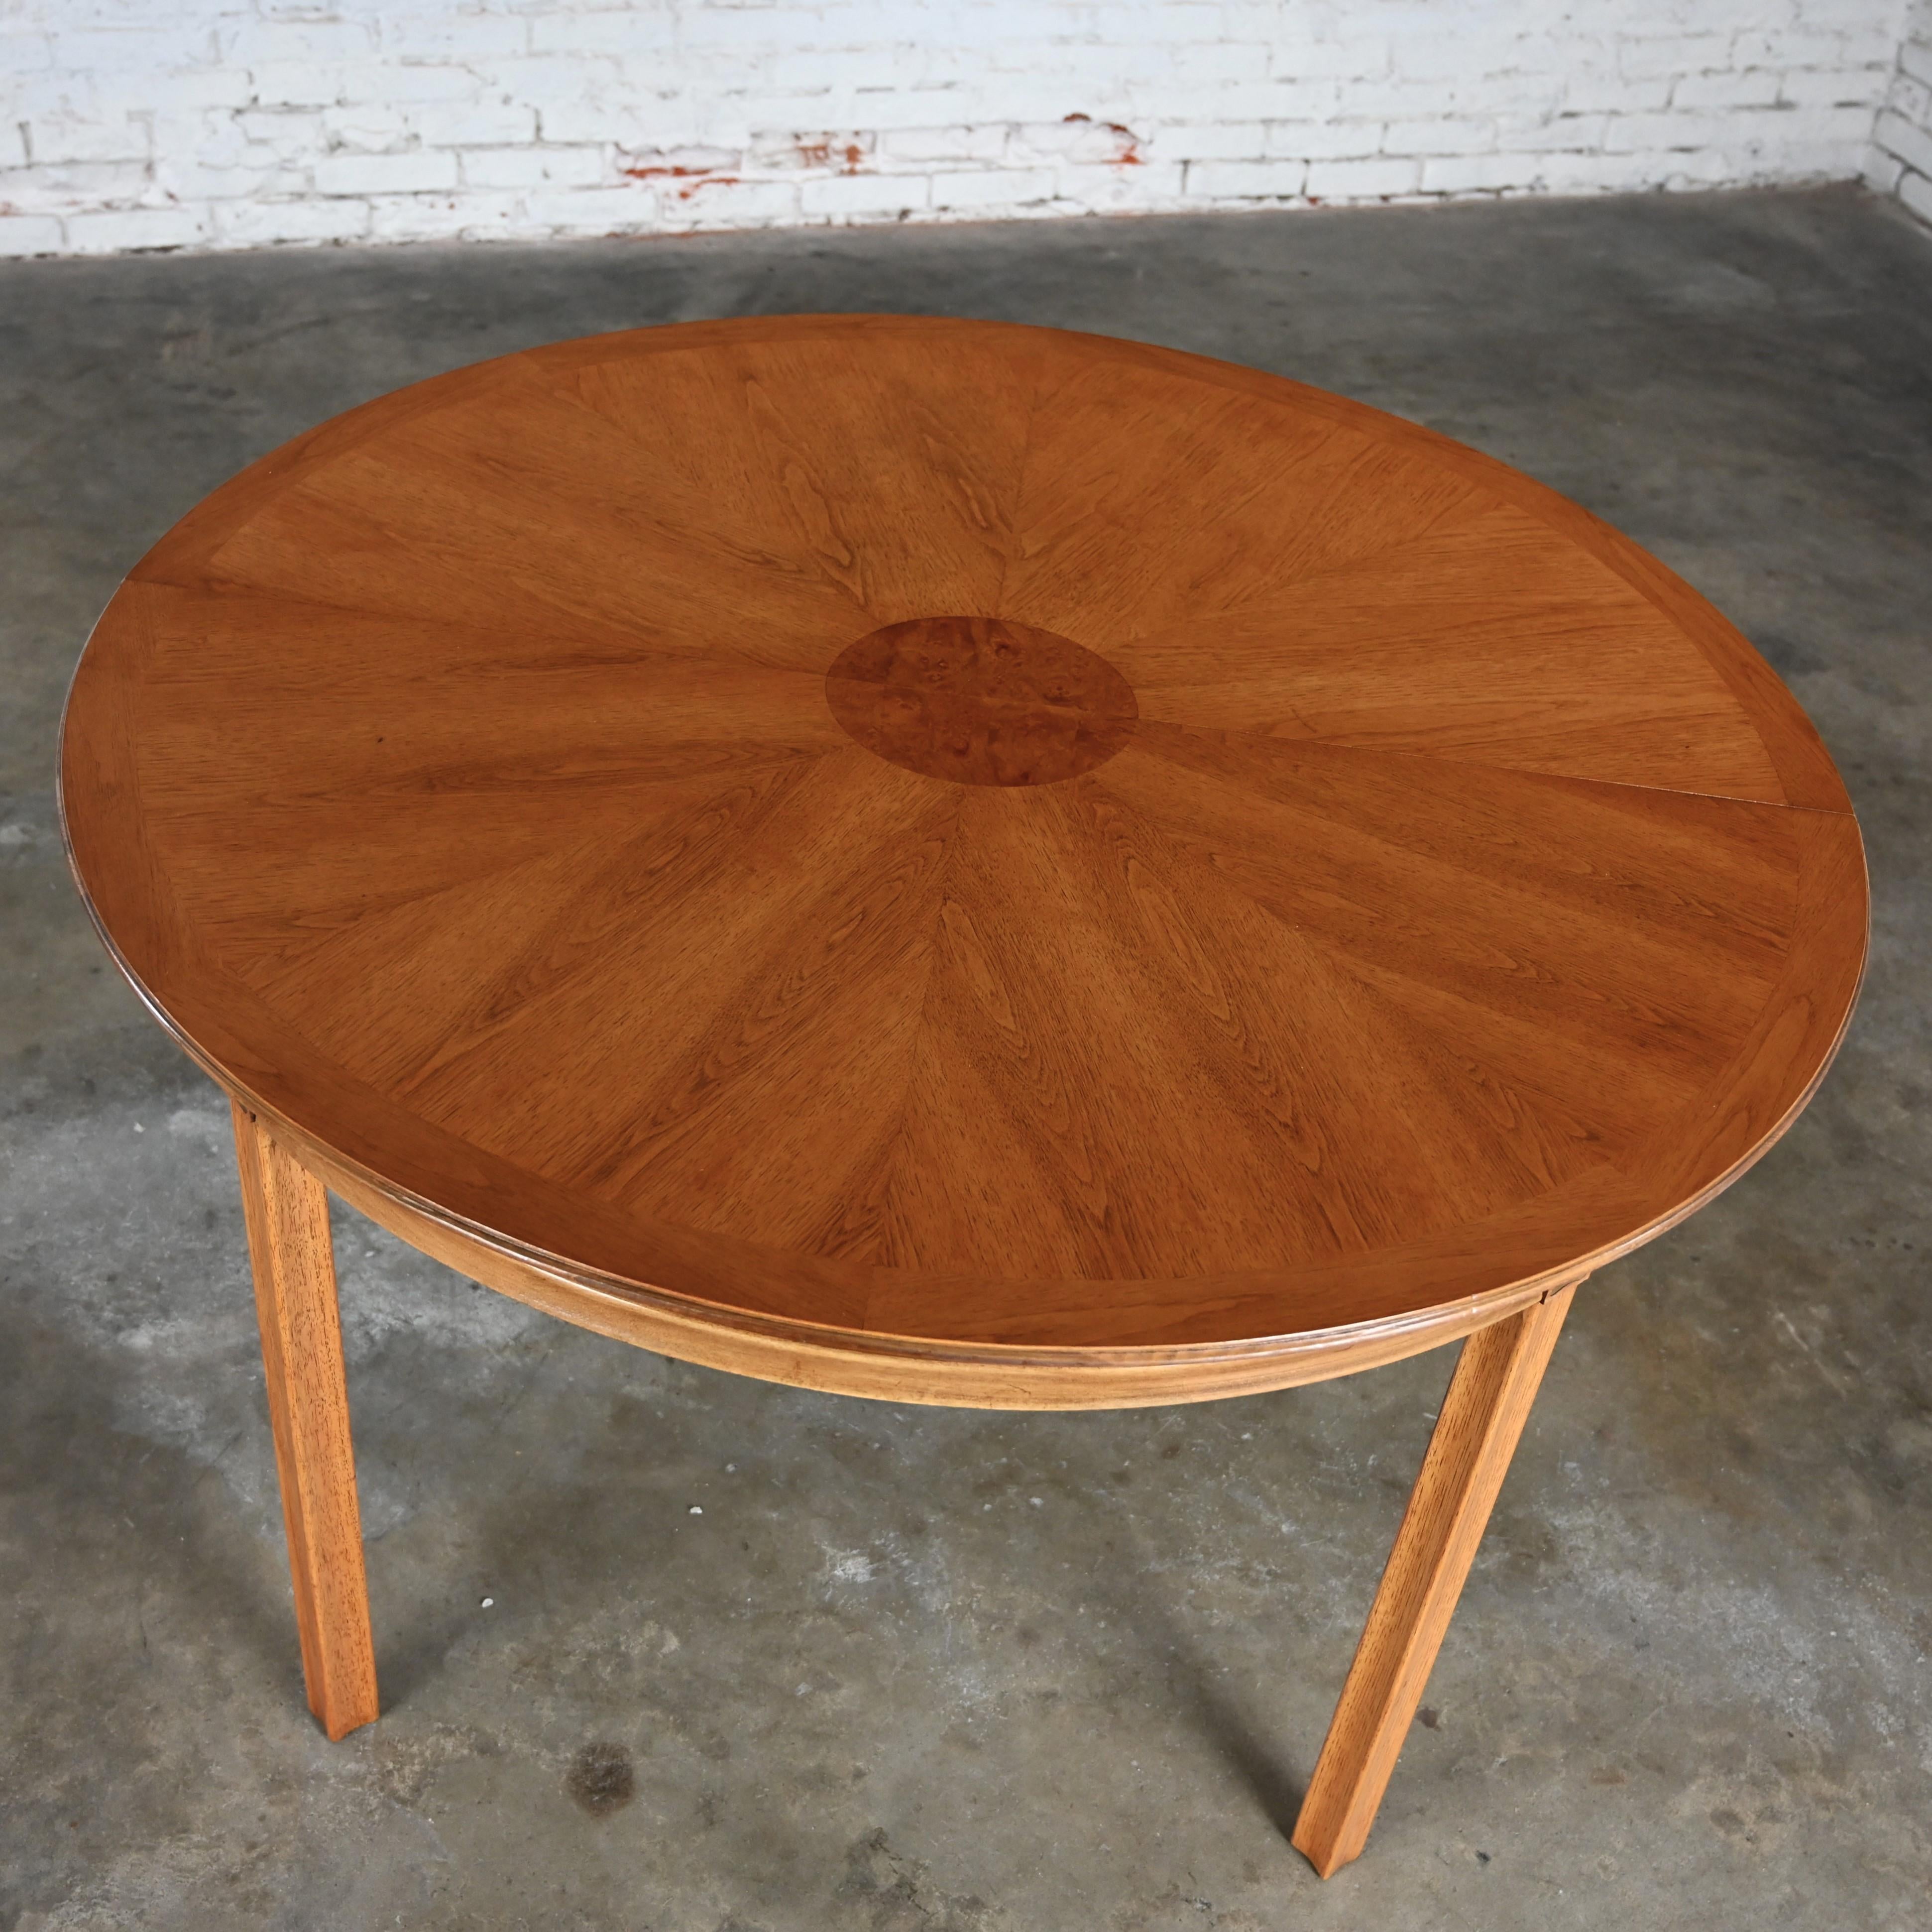 20th Century Hollywood Regency Round Extension Dining Table Thomasville Tamerlane Collection 